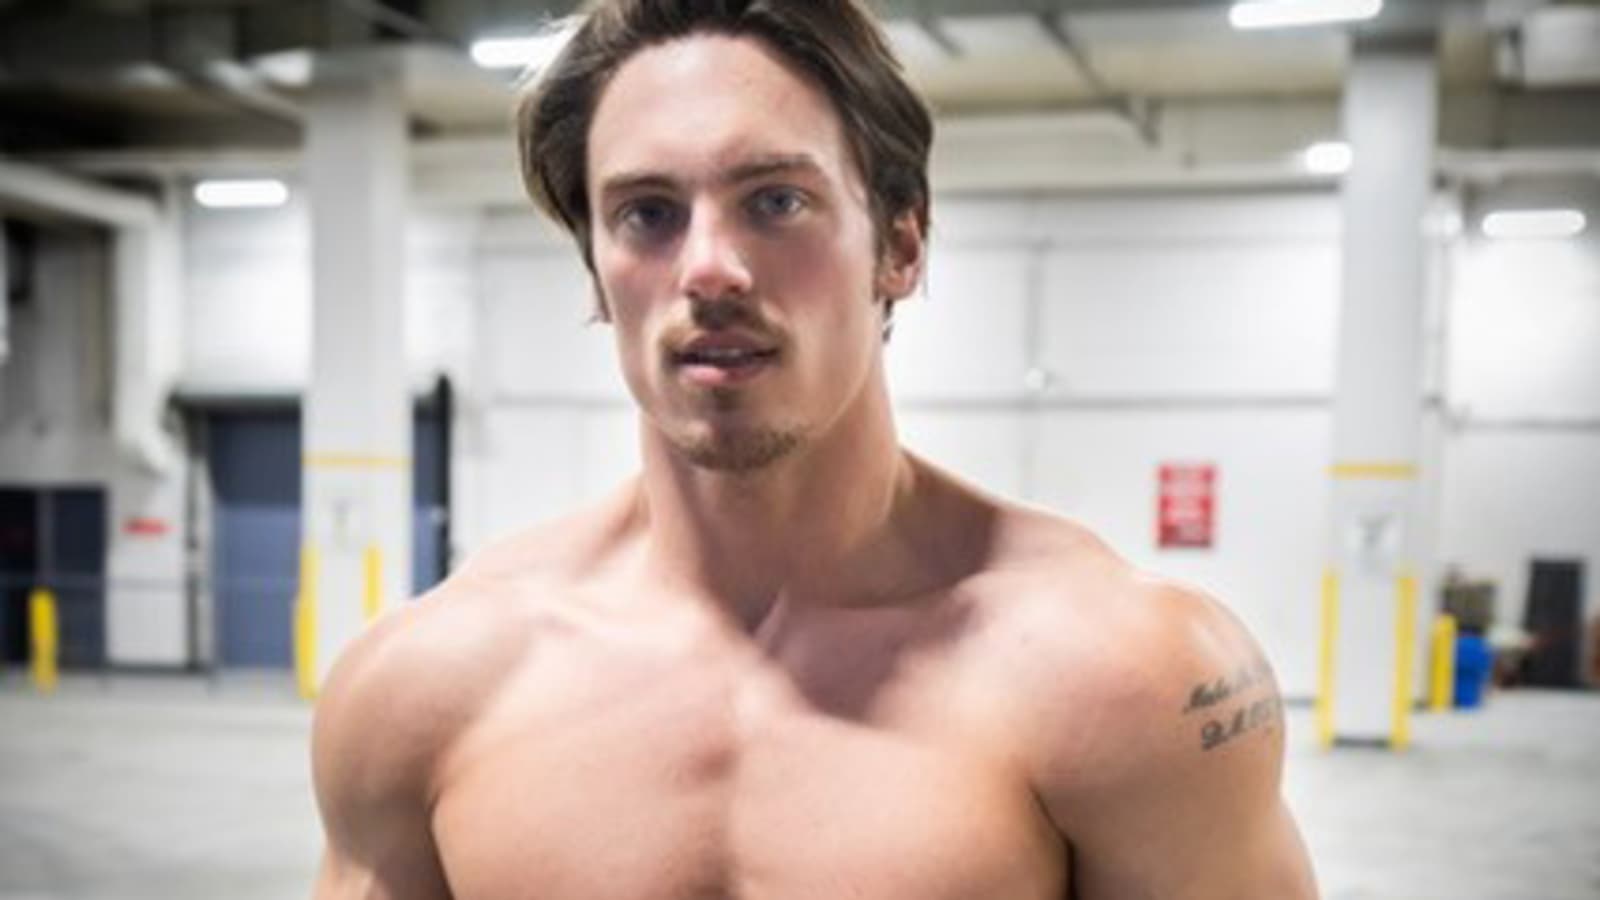 This Guy Became A Millionaire At 24 By Taking His Shirt Off On Youtube